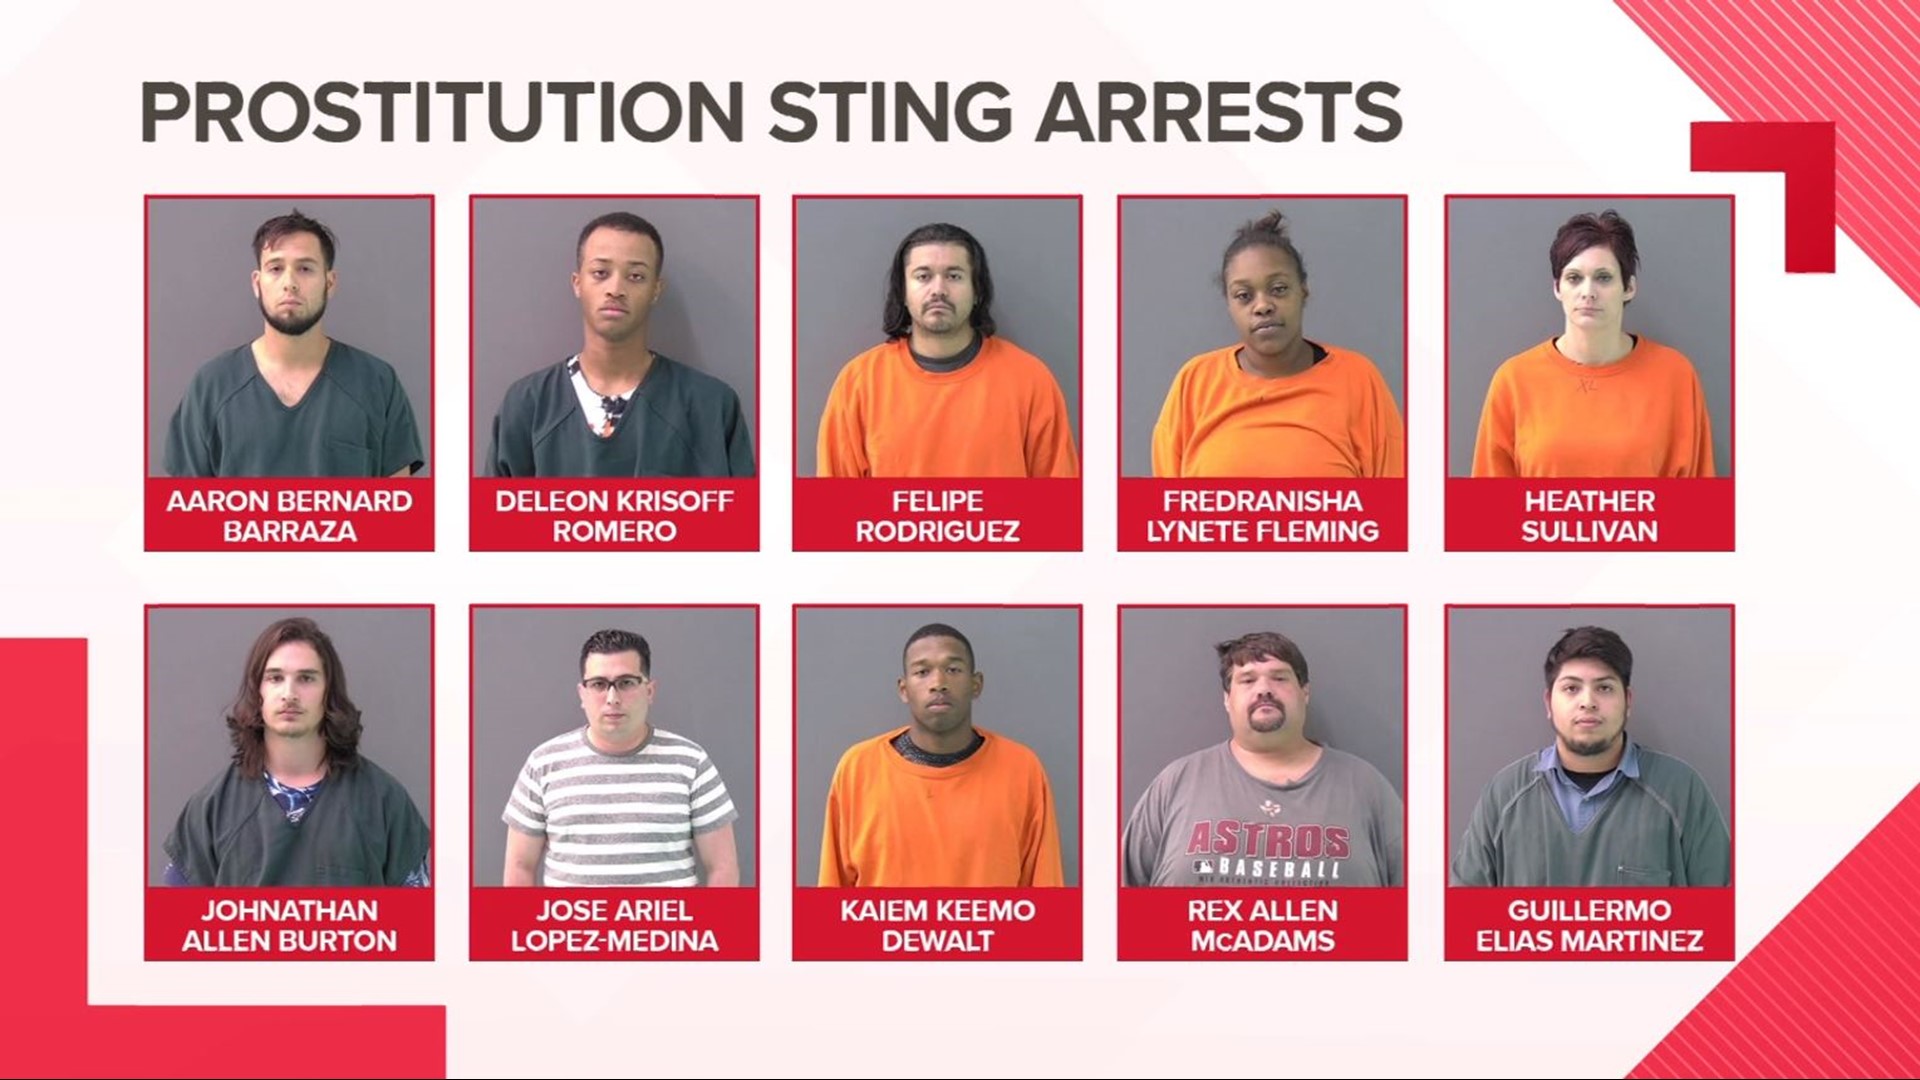 A Bell County prostitution sting in Aug. 2019, net 10 arrests. Two Fort Hood soldiers and a Killeen Chamber of Commerce employee were among those taken into custody, the sheriff's department says.